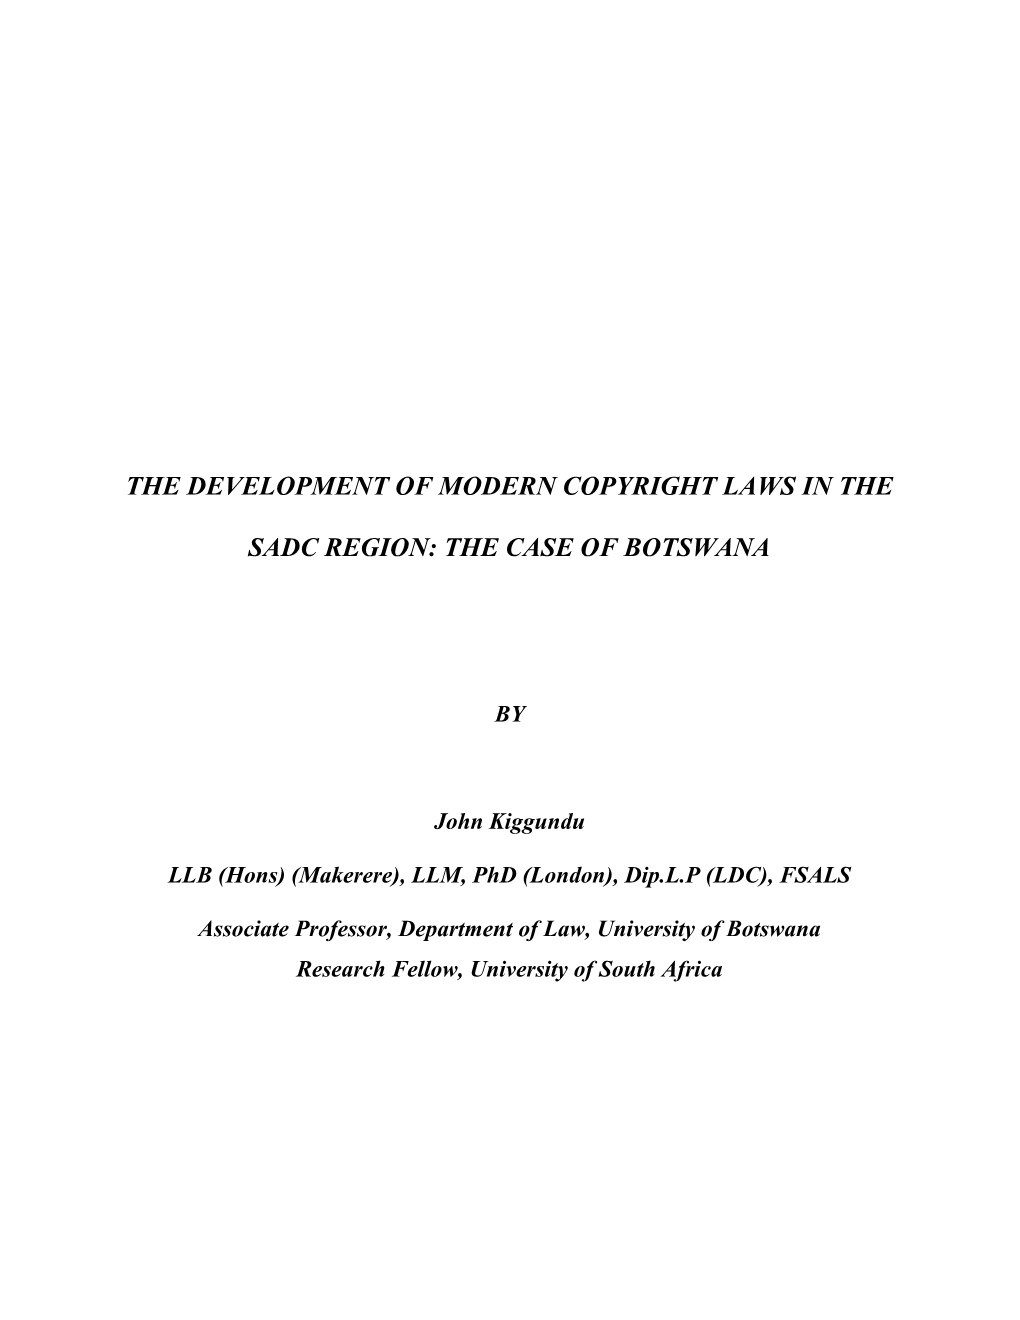 The Development of Modern Copyright Laws in the Sadc Region: the Case of Botswana